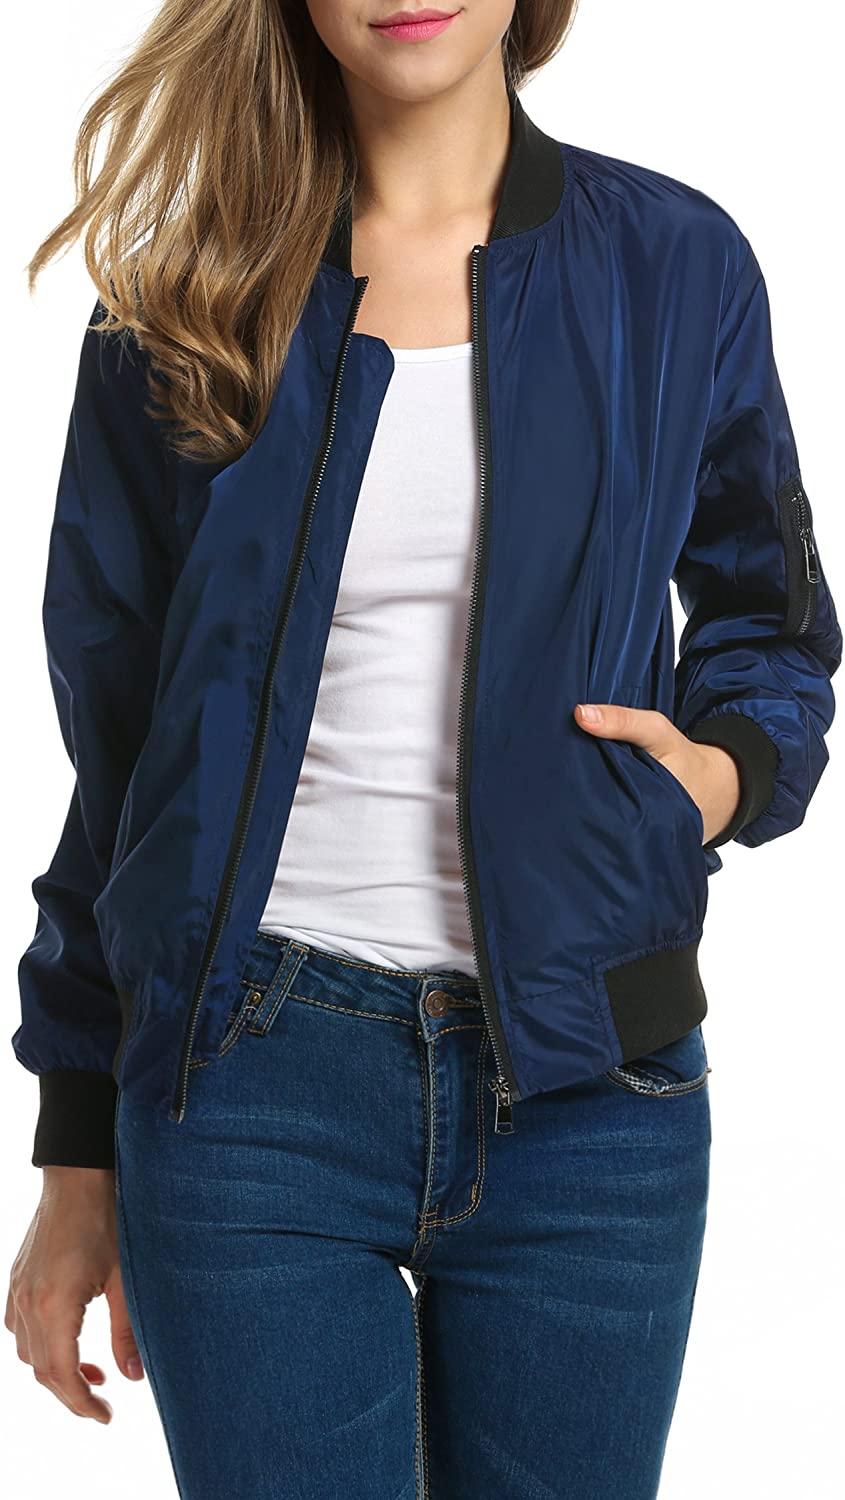 Cethrio Women's Bomber Jackets Lightweight Zip Up Jackets Casual